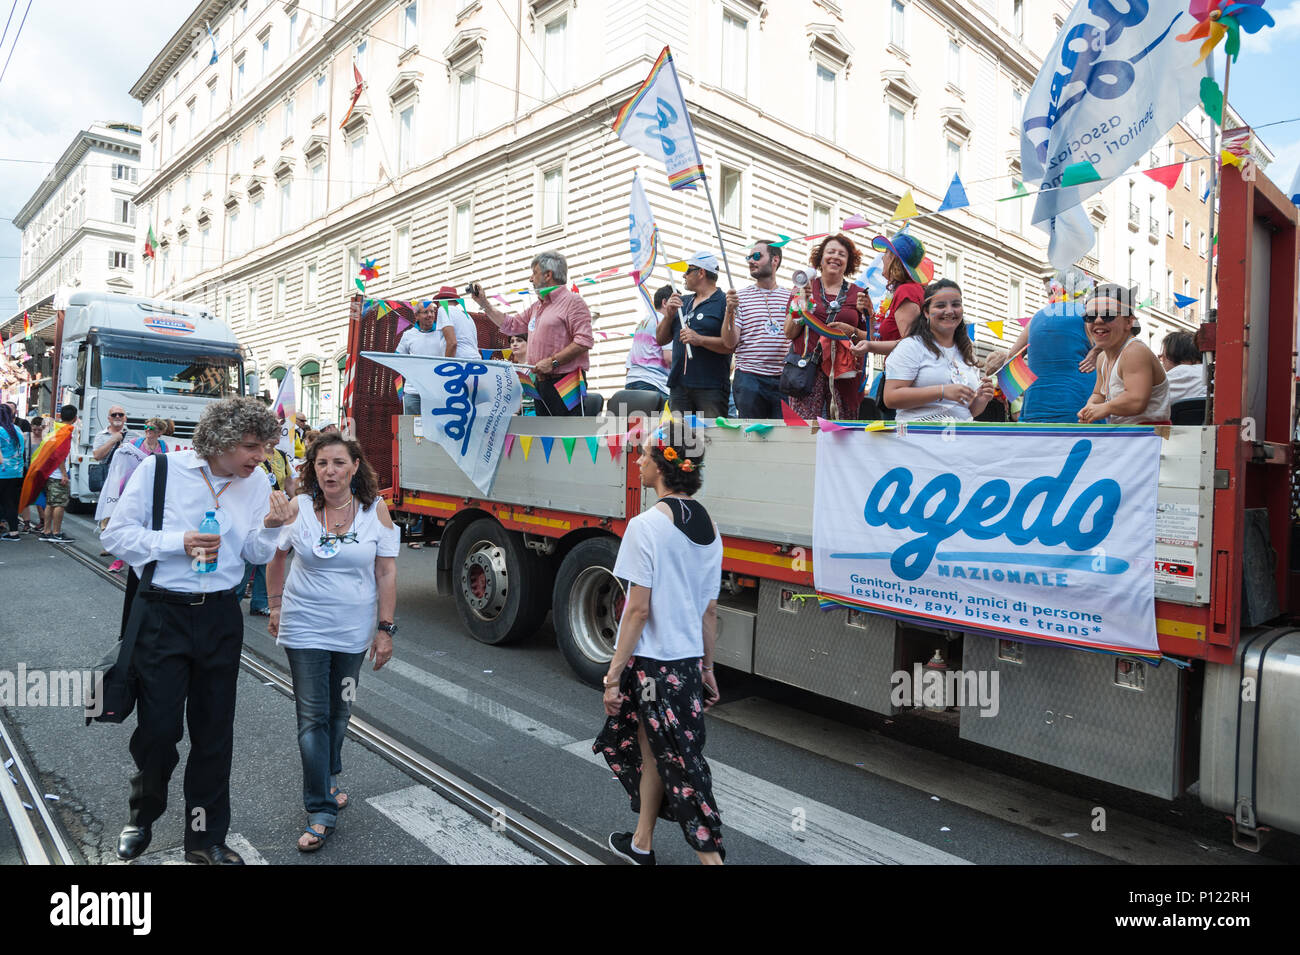 Rome, Italy. 09th June, 2018. Thousands of people took part in the Gay Pride 2018 in Rome on June 9th, marching through some streets of the city from Piazza della Repubblica to Piazza Madonna di Loreto. Present LGTB associations, political figures including the vice mayor of Rome Luca Bergamo, presidents of some Municipalities, the president of the Lazio Region Luca Zingaretti and his deputy Massimiliano Smeriglio, the secretary of CGIL Susanna Camusso. Credit: Leo Claudio De Petris/Pacific Press/Alamy Live News Stock Photo